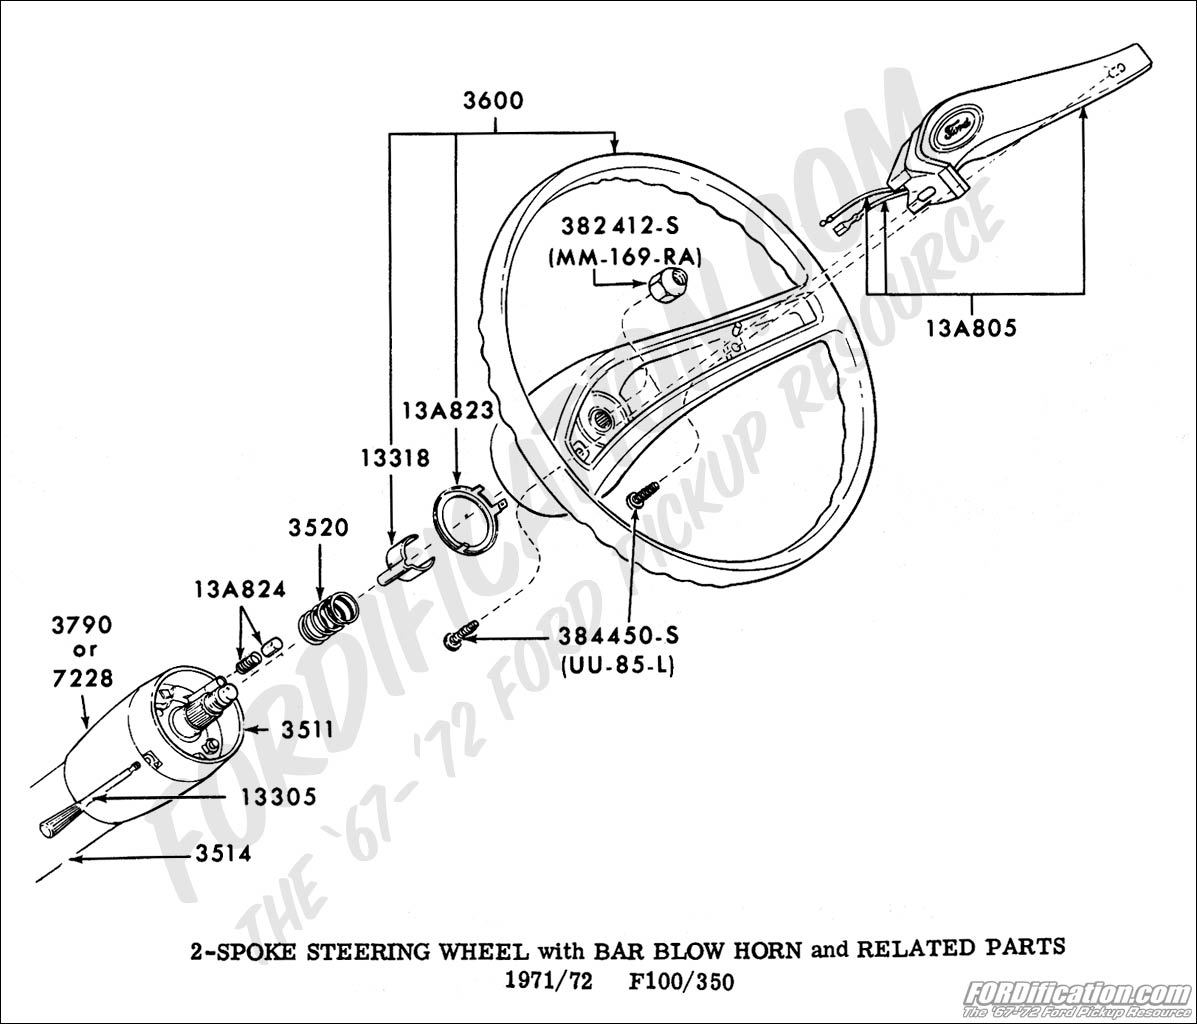 1972 Ford F100 Ignition Switch Wiring Diagram from fordification.com